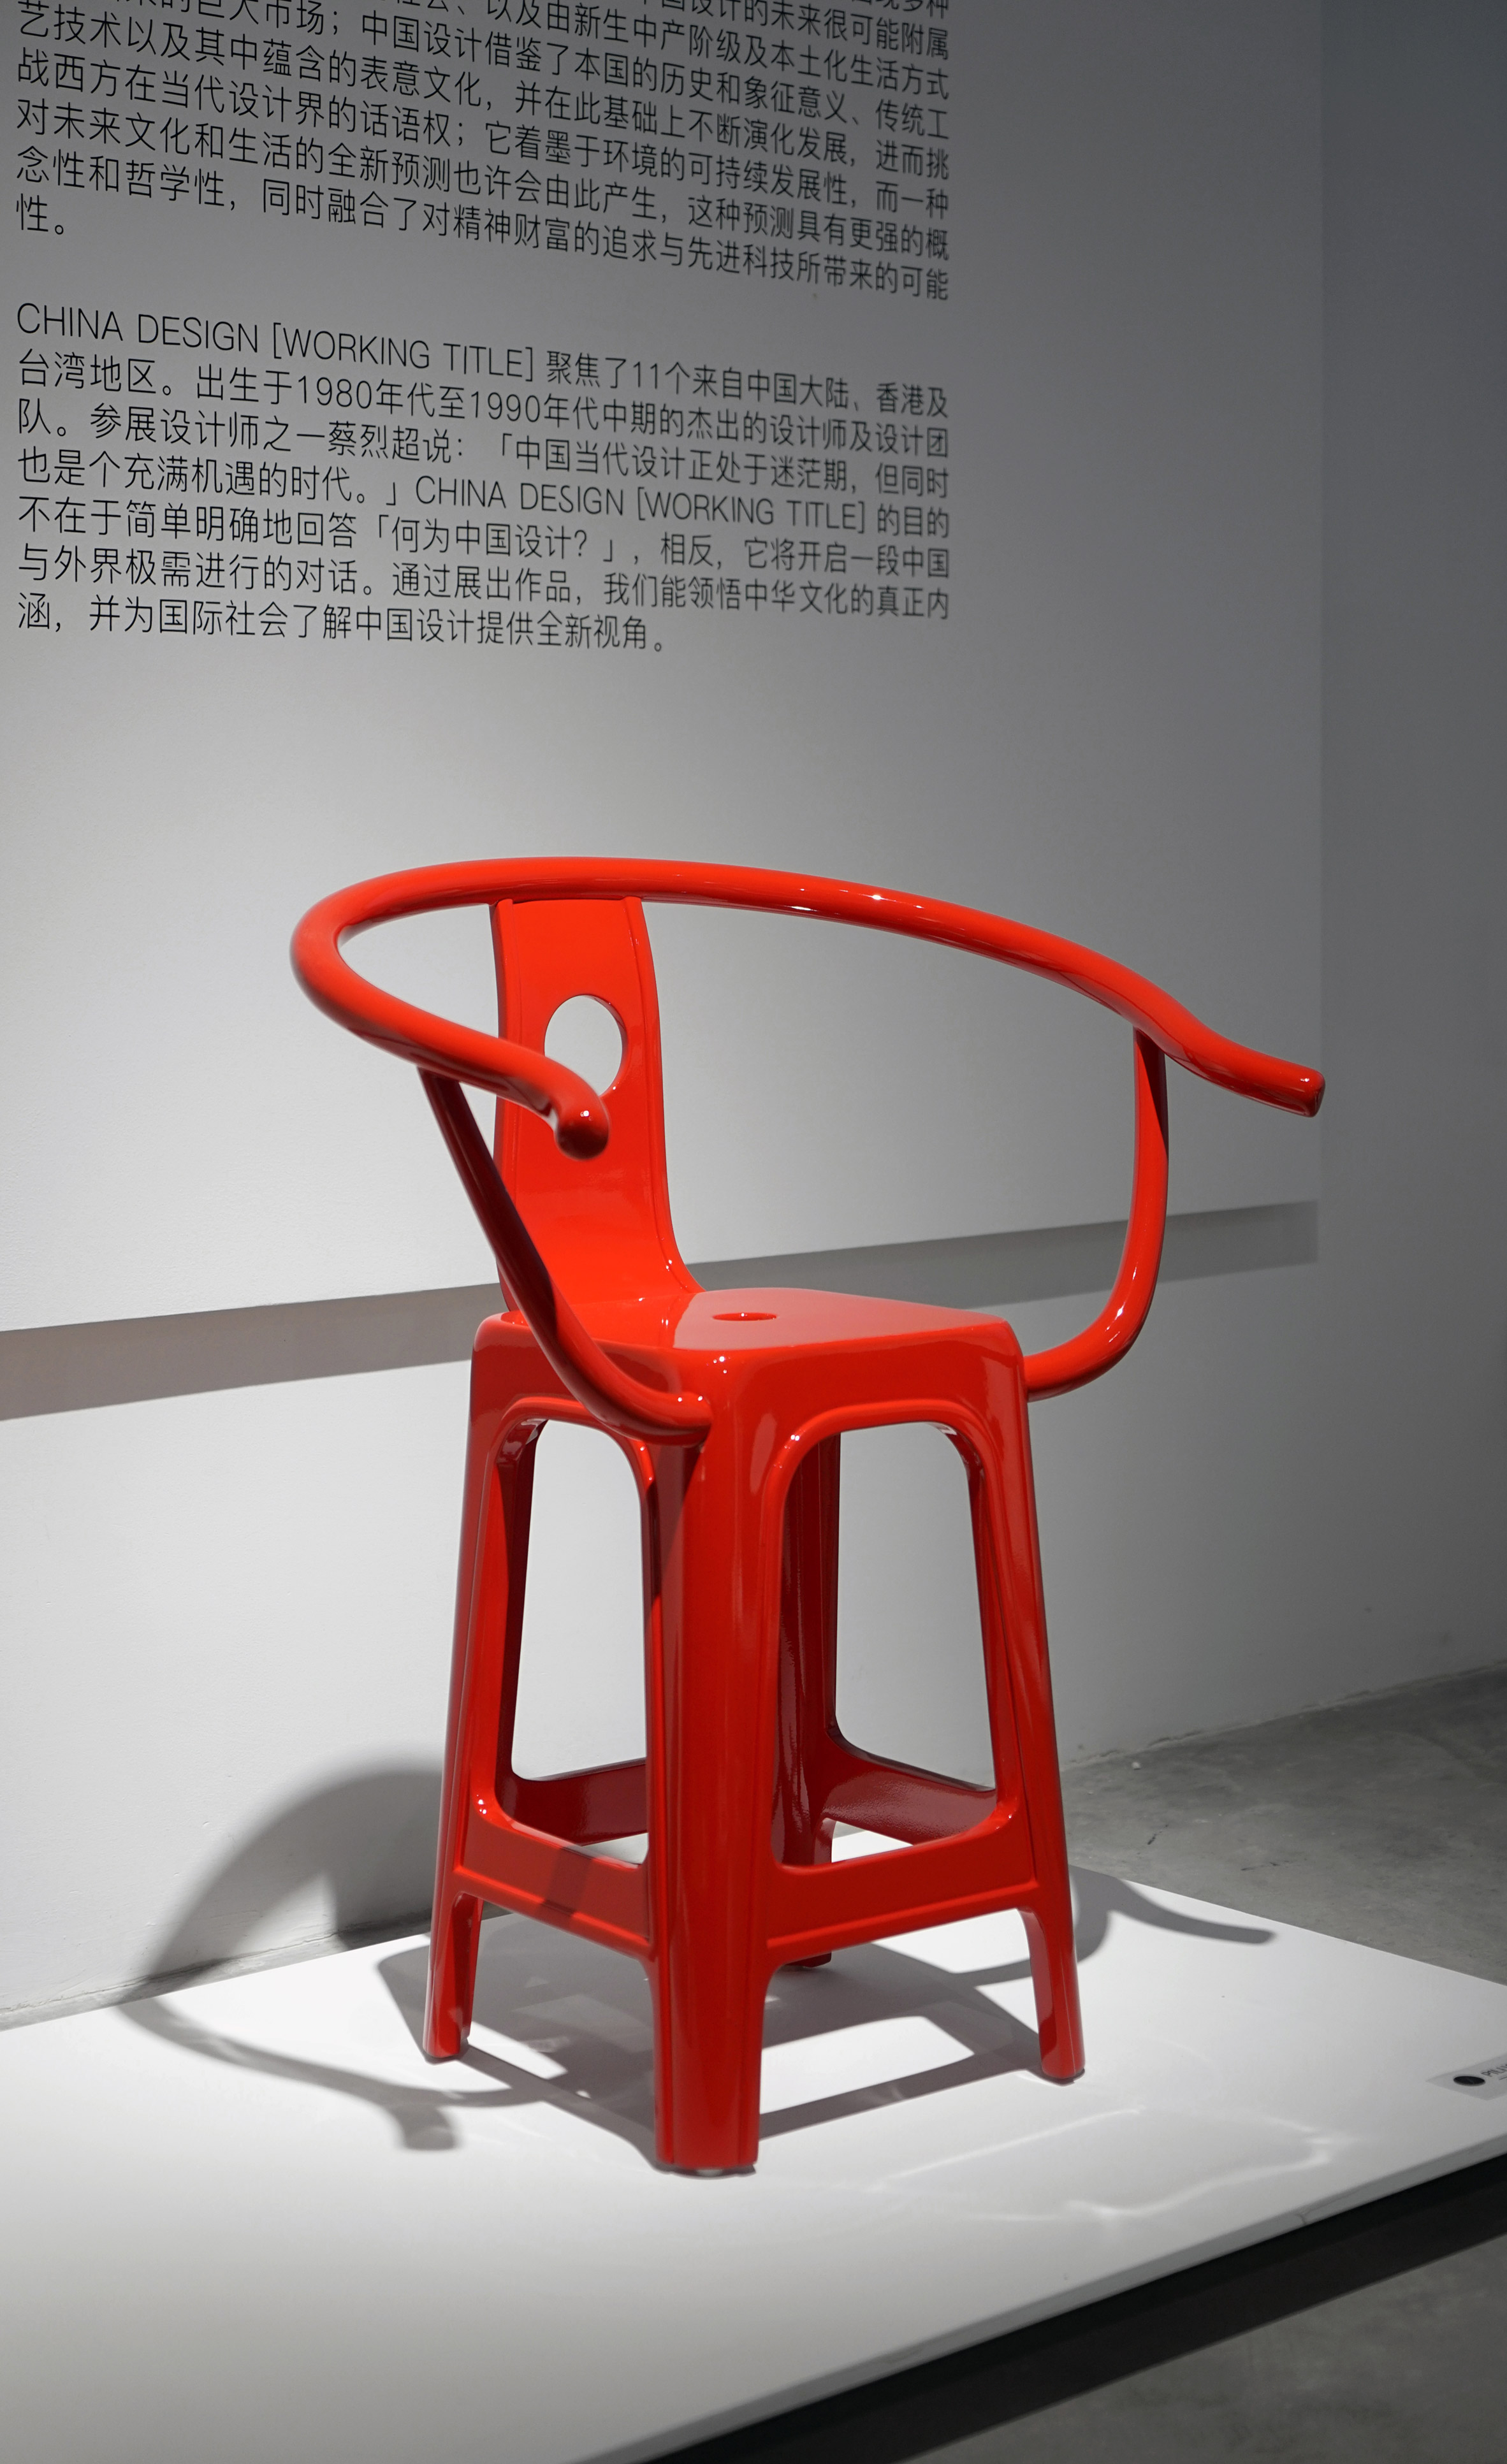 China Design Working Title furniture design exhibition in Shanghai, China